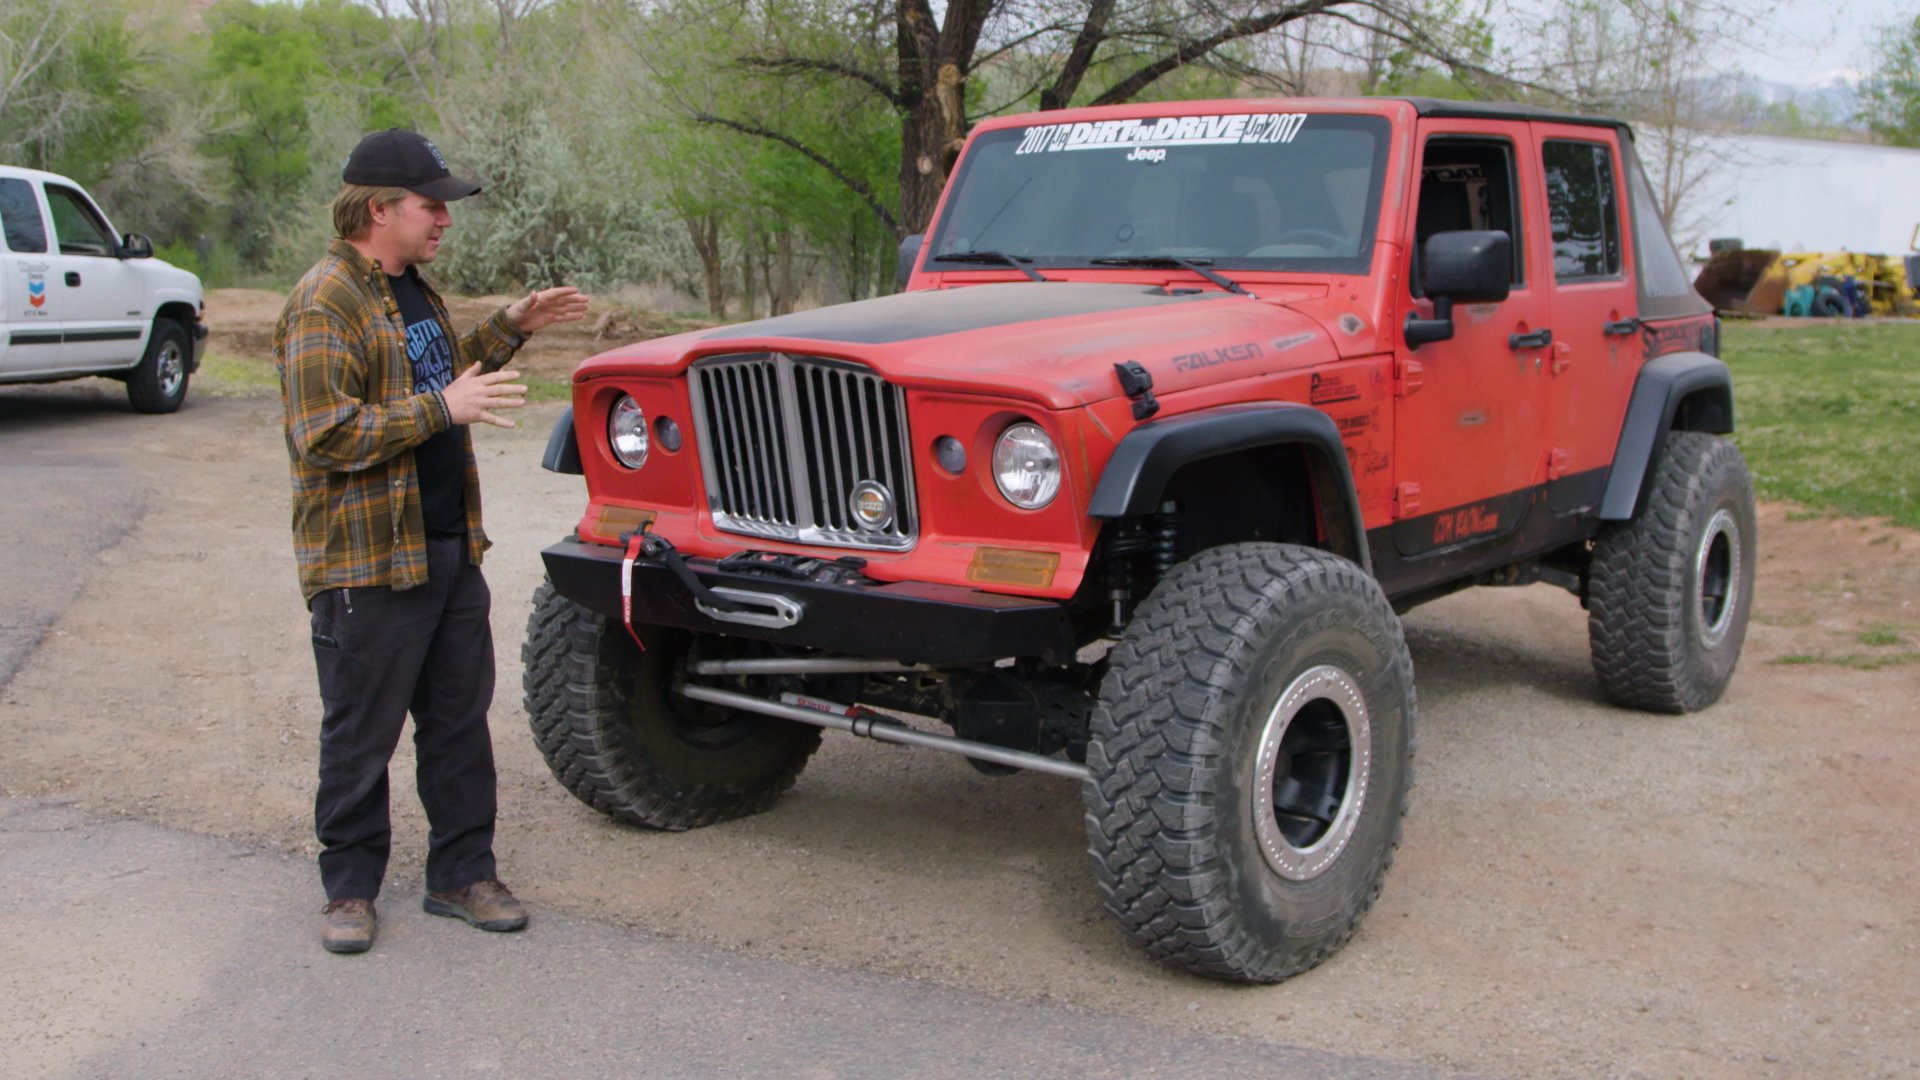 Dirt Every Day Extra: 7, Episode 18 - Vintage Gladiator Front Clip on a Jeep  JK | MotorTrend